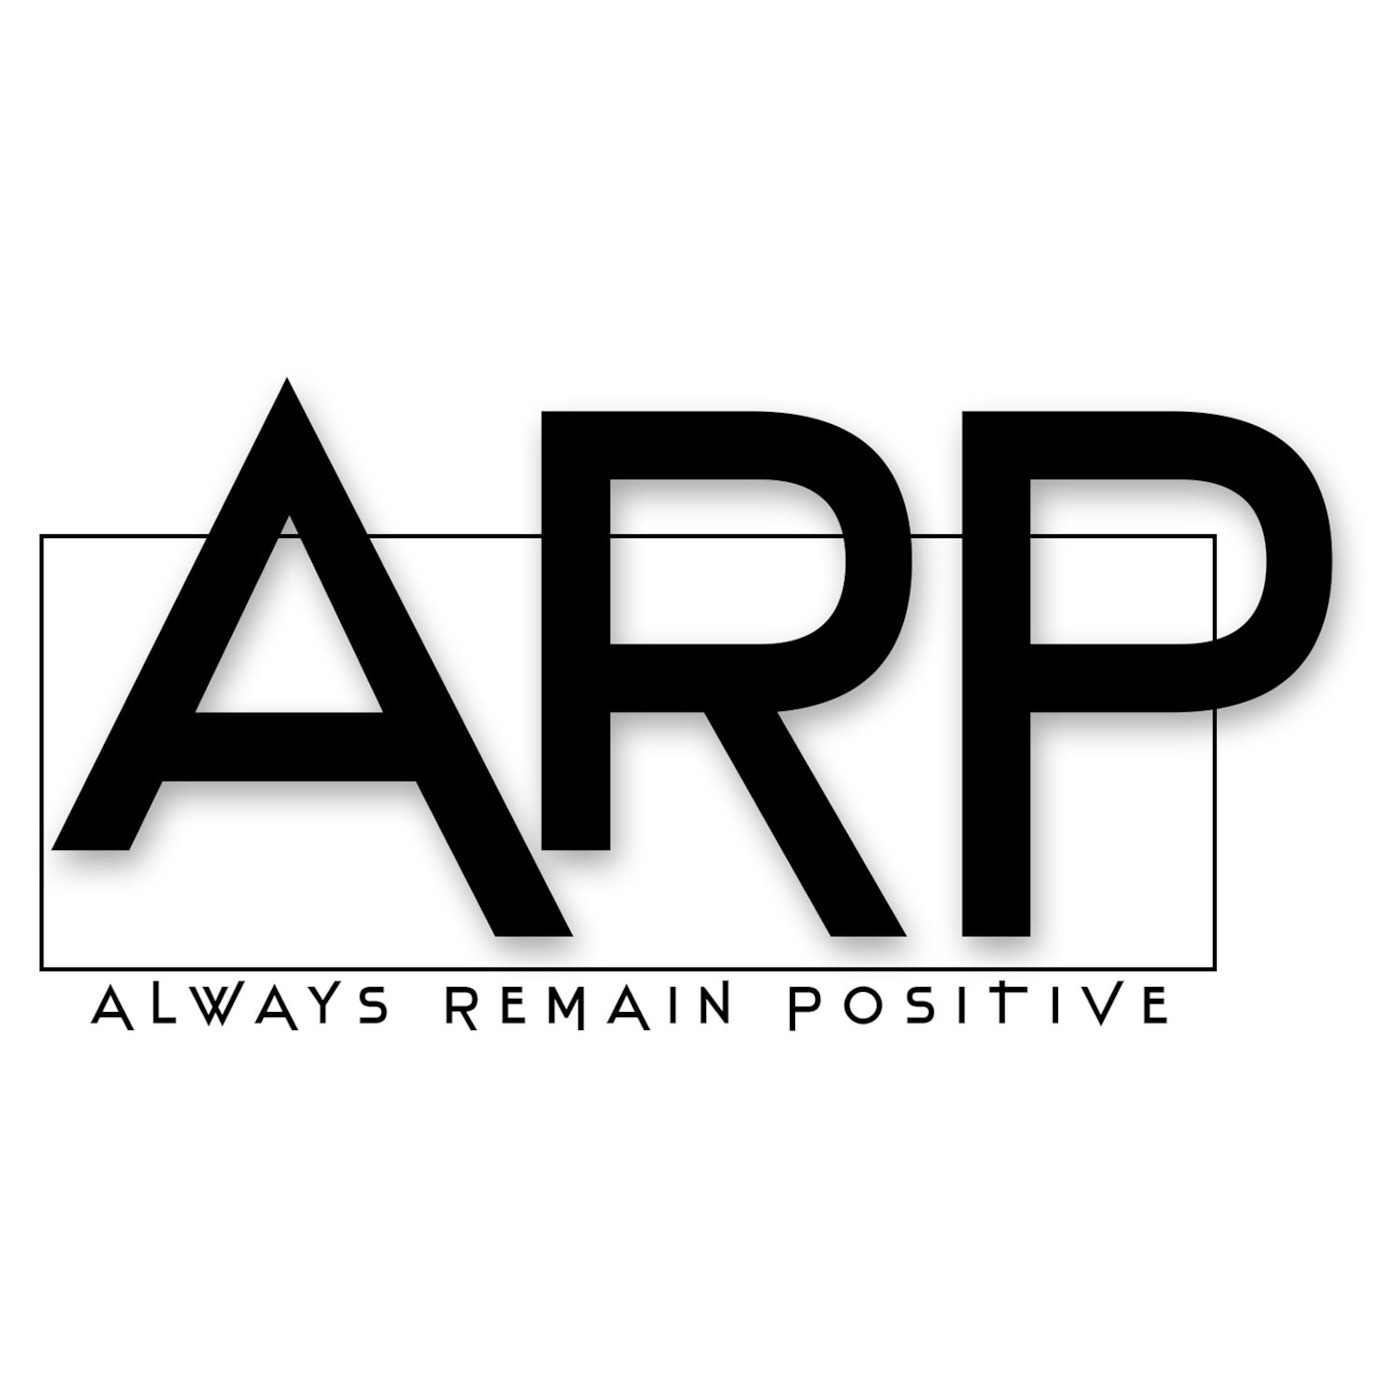 Always Remain Positive (ARP) Podcast by Nate Spates Jr.